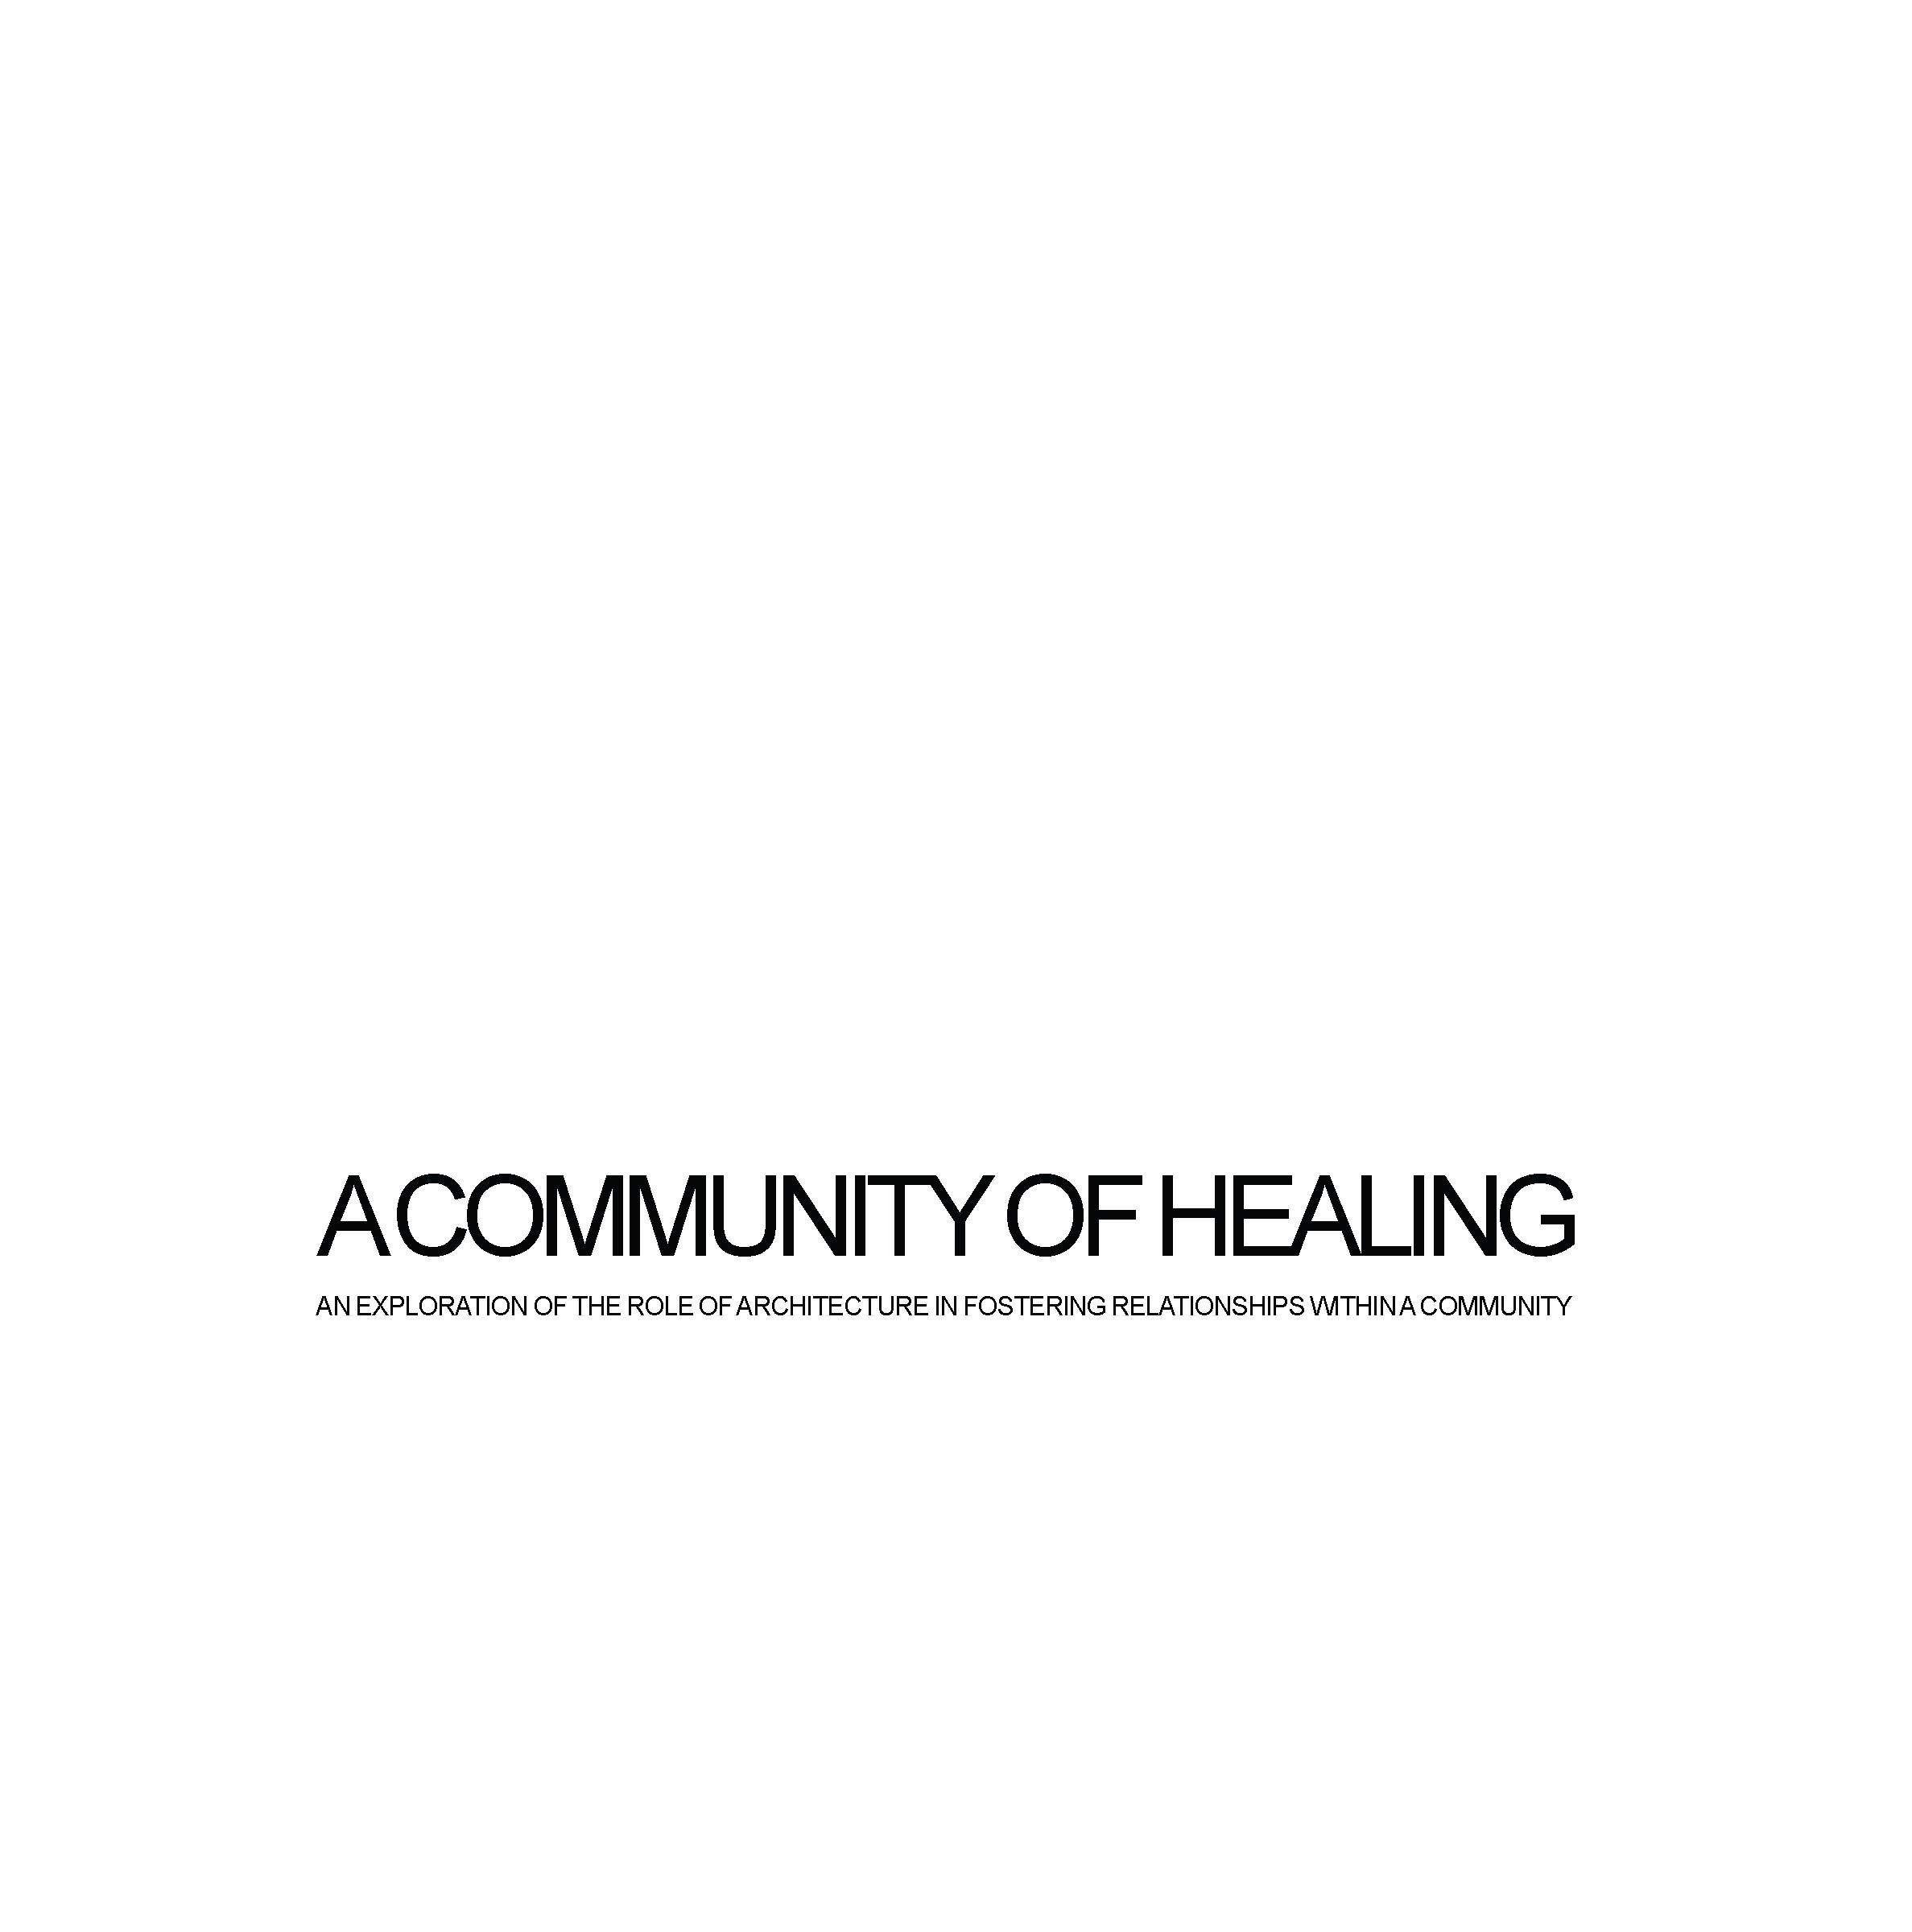 A Community of Healing: an Exploration of the Role of Architecture in Fostering Relationships Within a Community   (click for a larger preview)